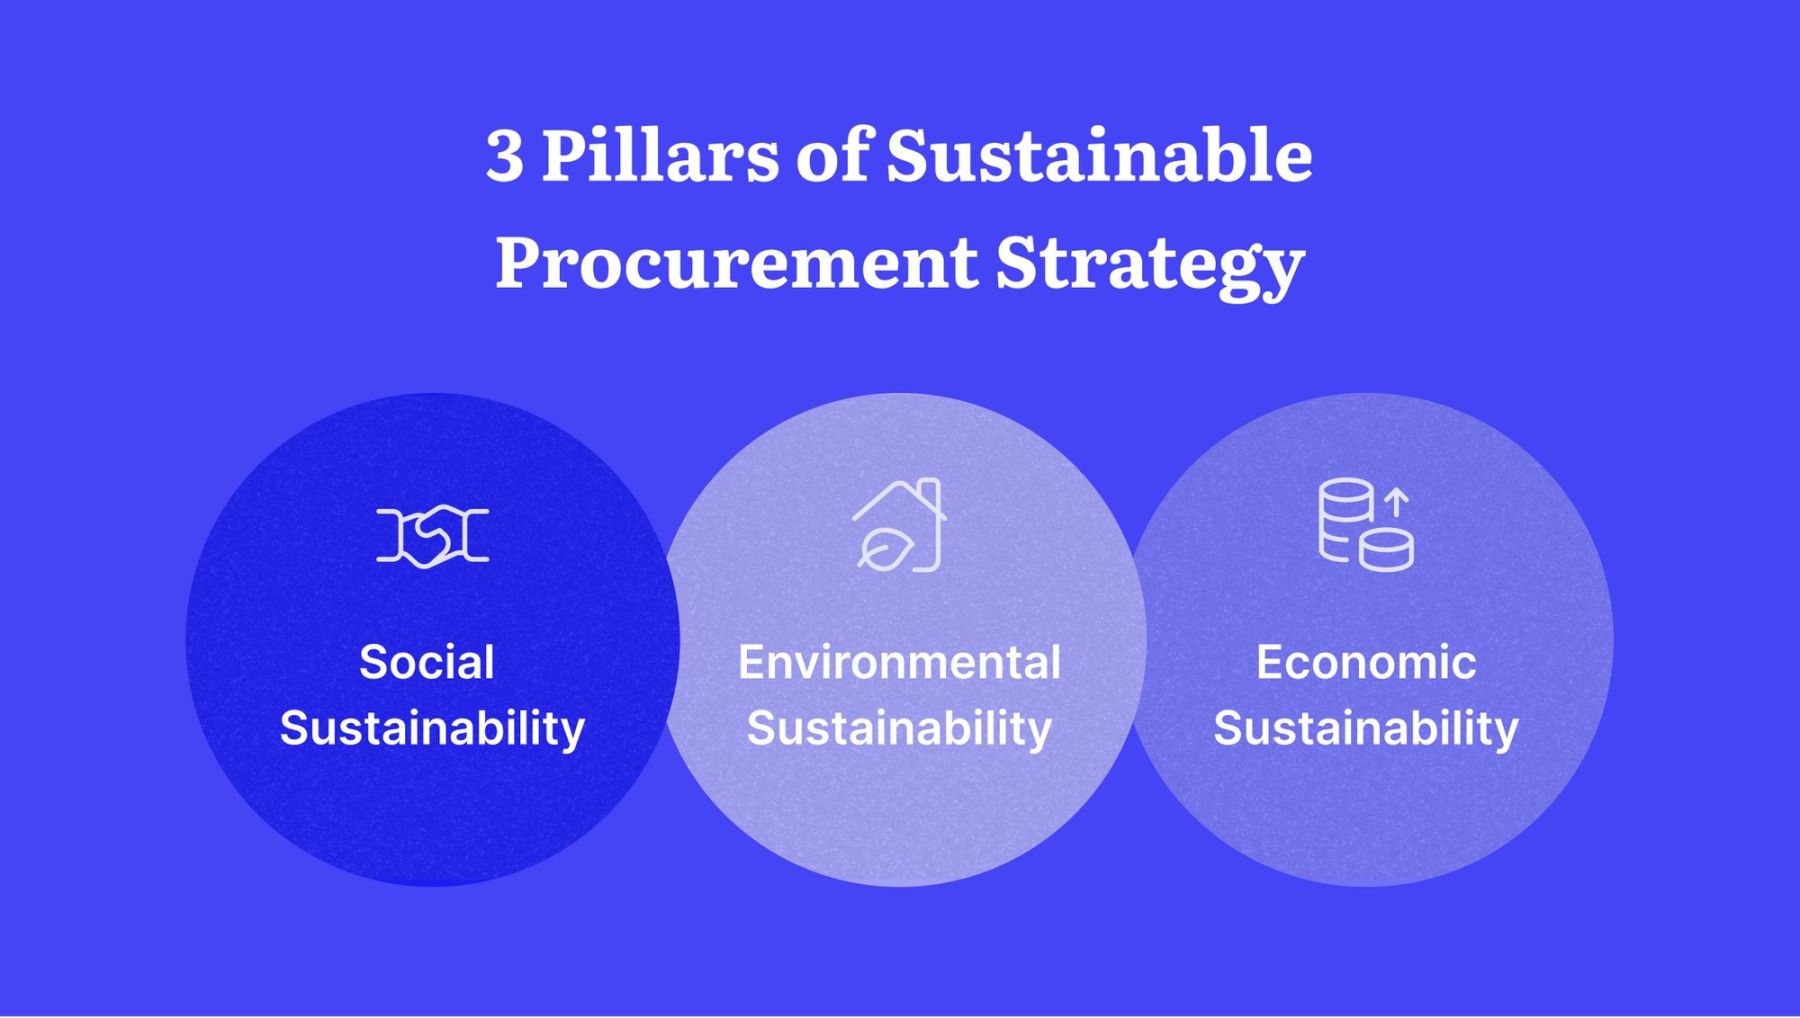 3 pillars of sustainable procurement strategy